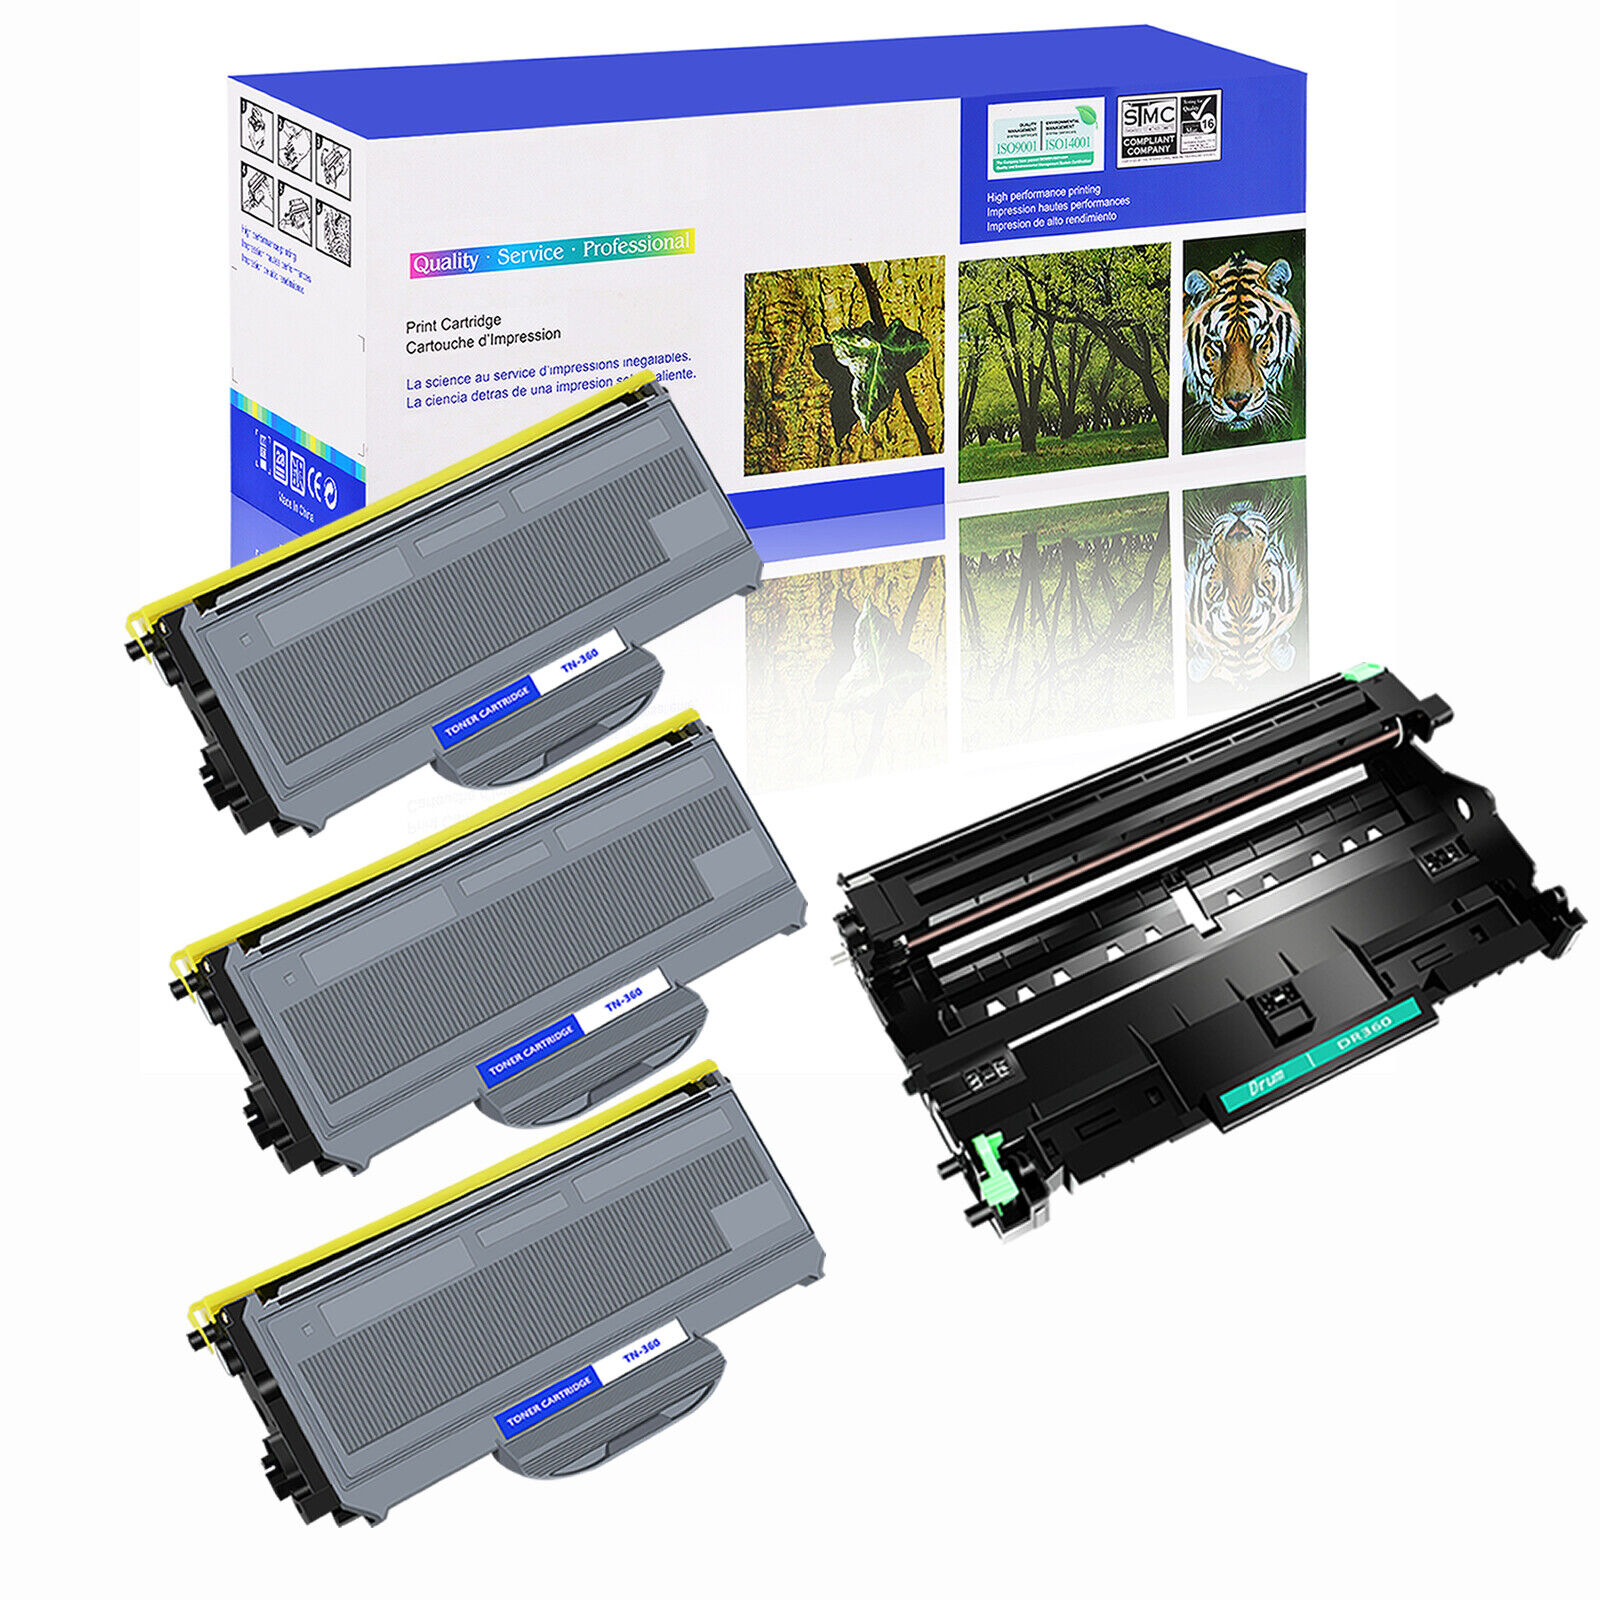 3PK TN360 Toner +1PK DR360 Drum Unit for Brother MFC-7840W MFC-7320 MFC-7340